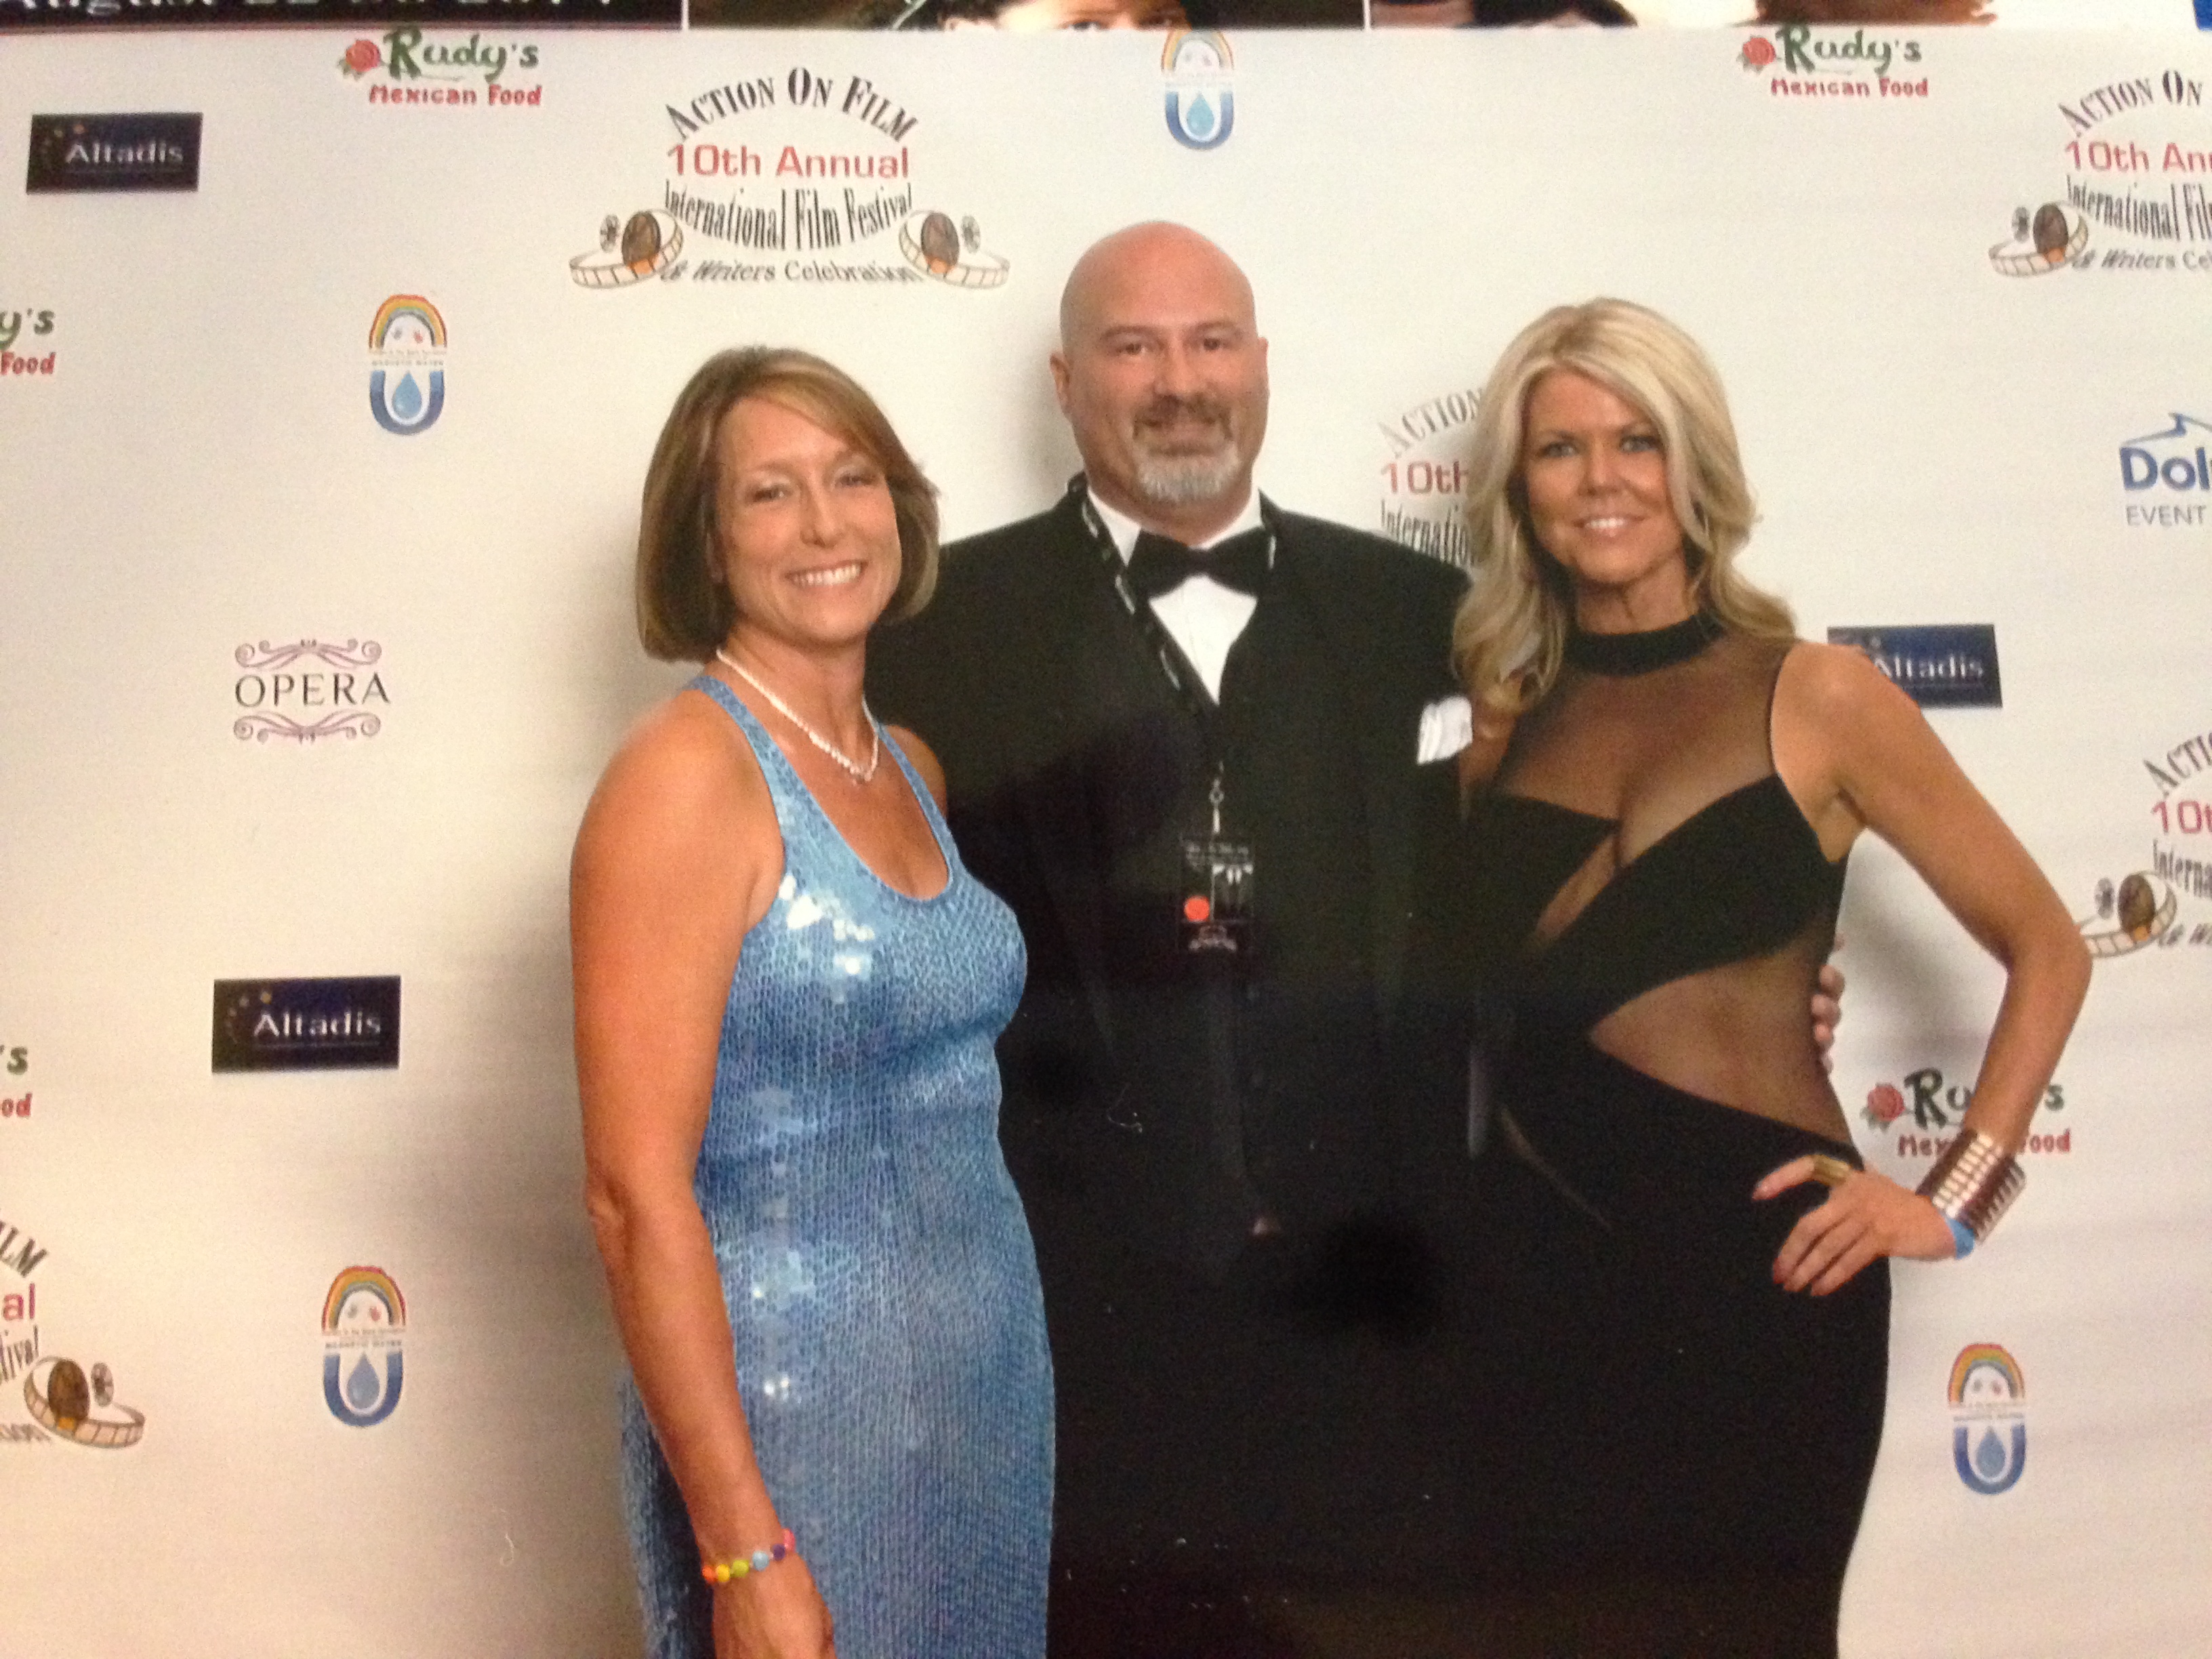 August 2014 Action on Film Awards with Ben Graziose and Tracey Birdsall